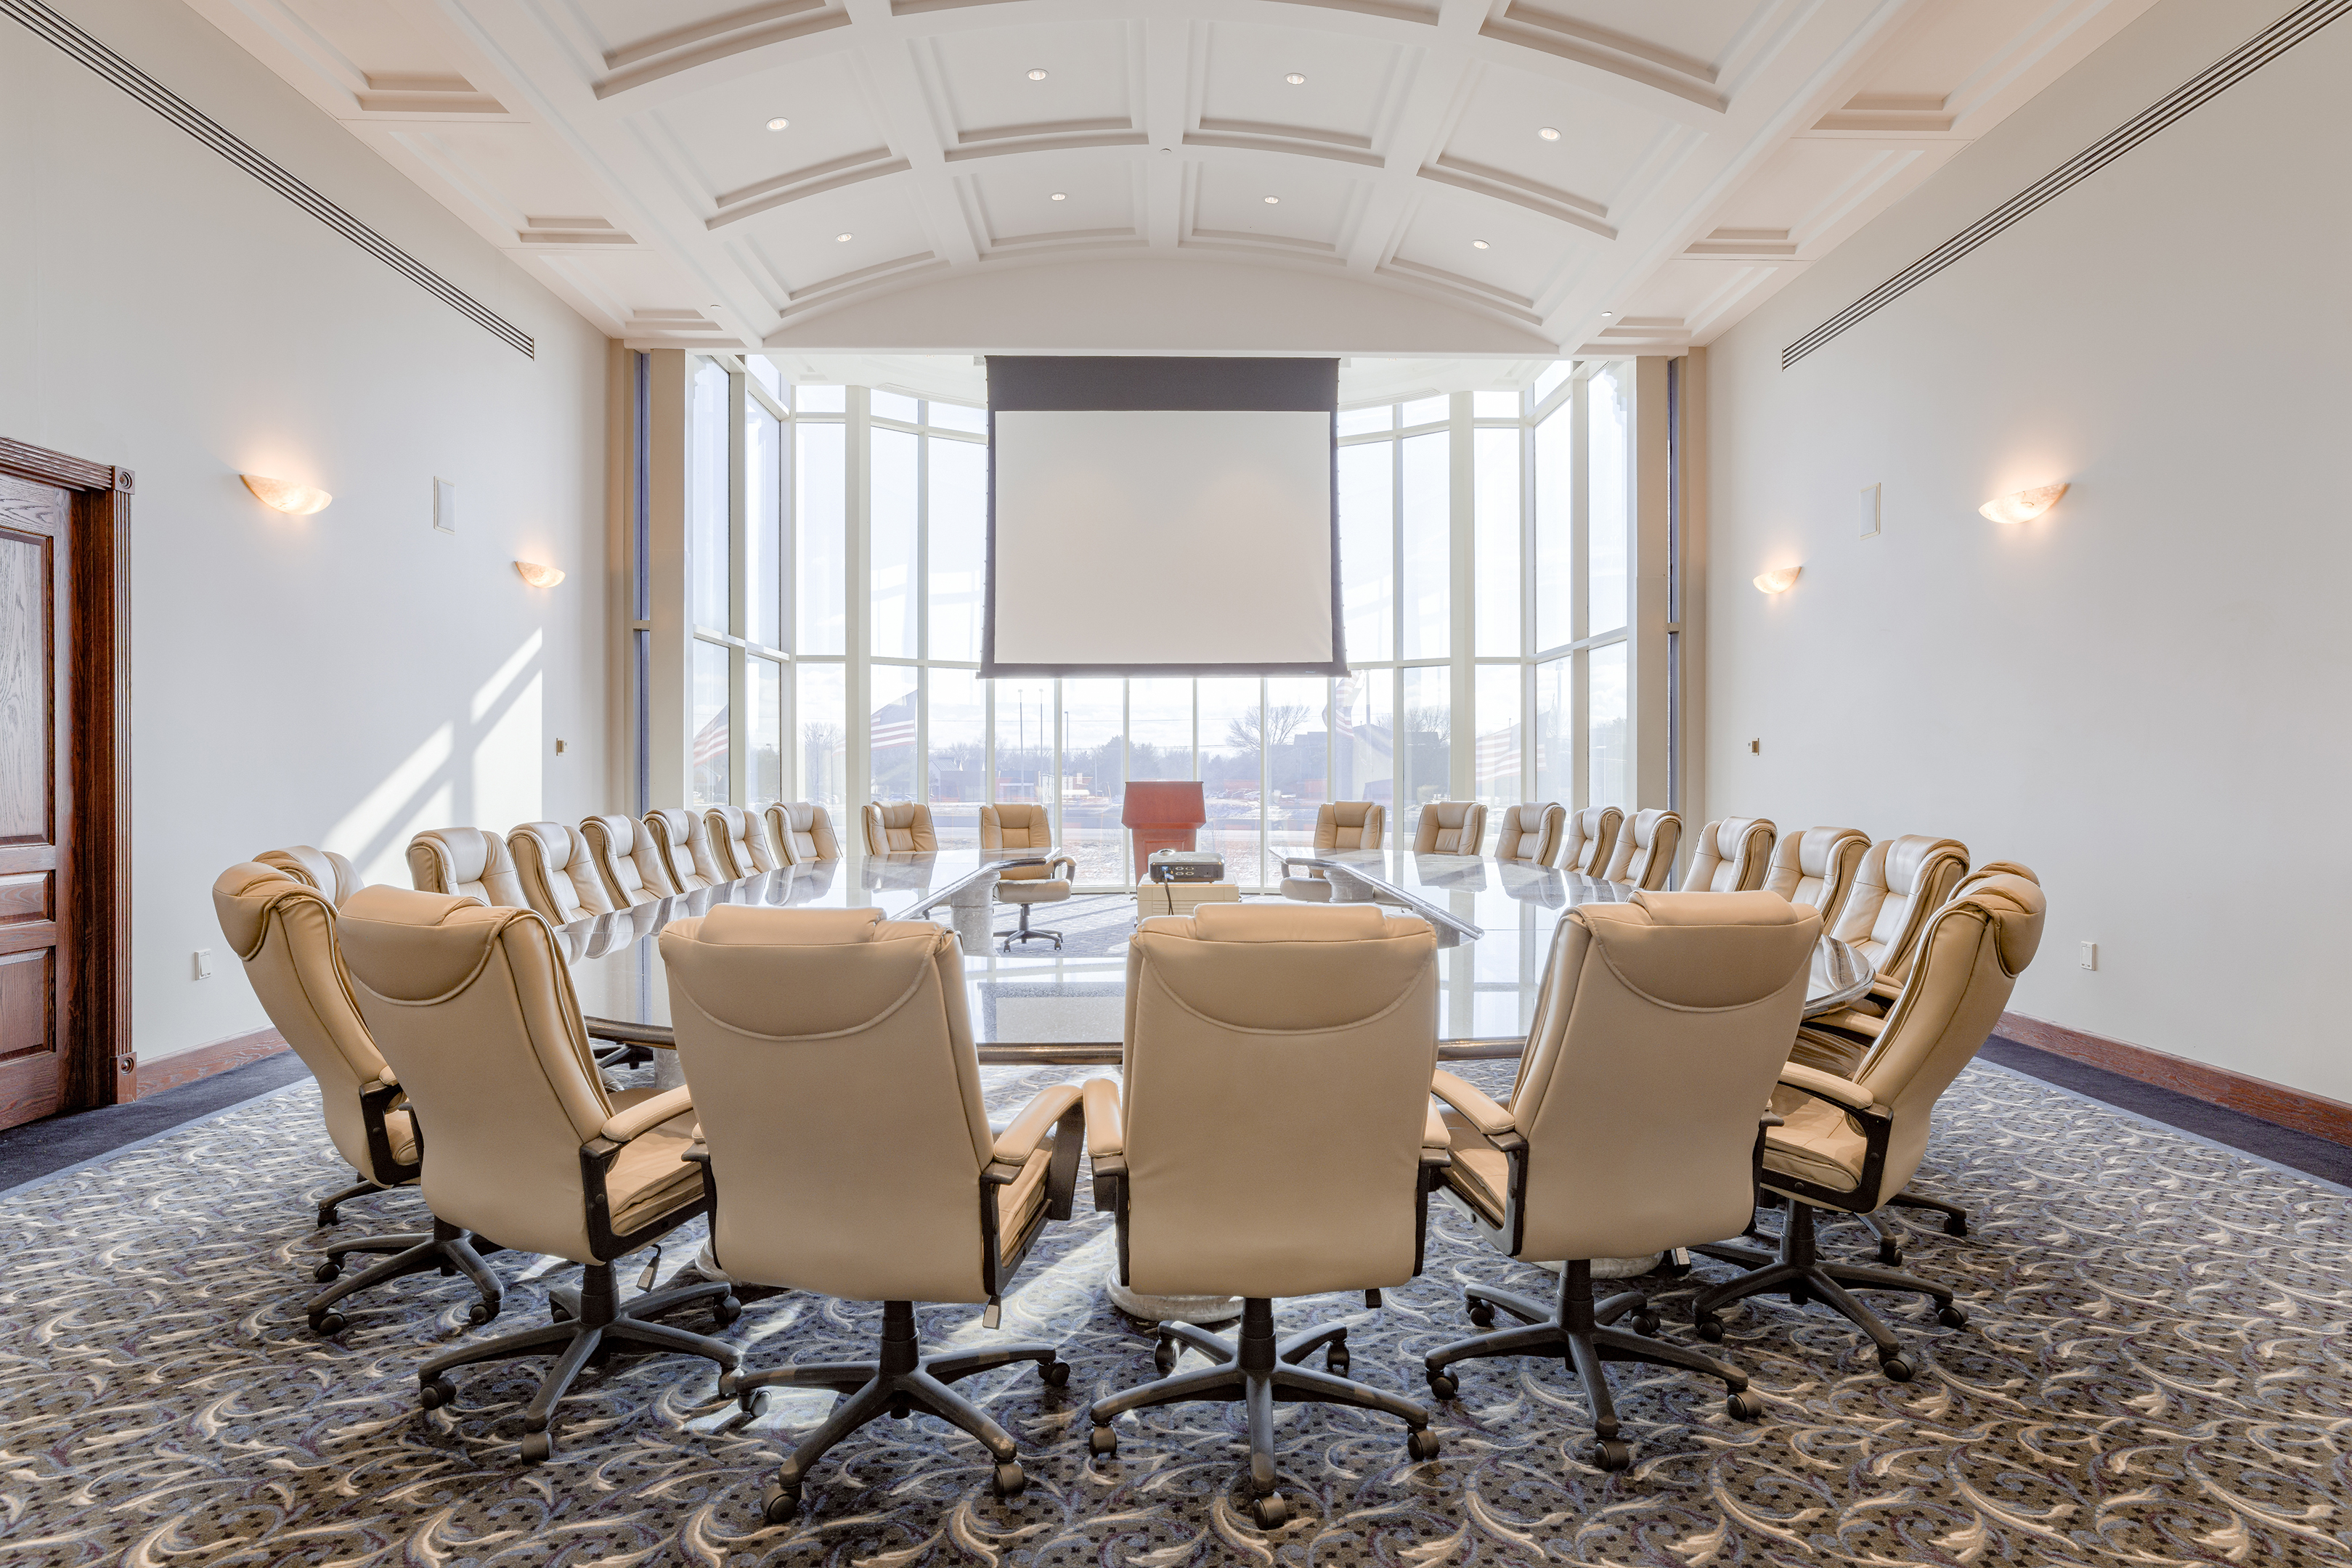 The executive board room, available for lease within the Millennium Plaza building in Omaha, NE.